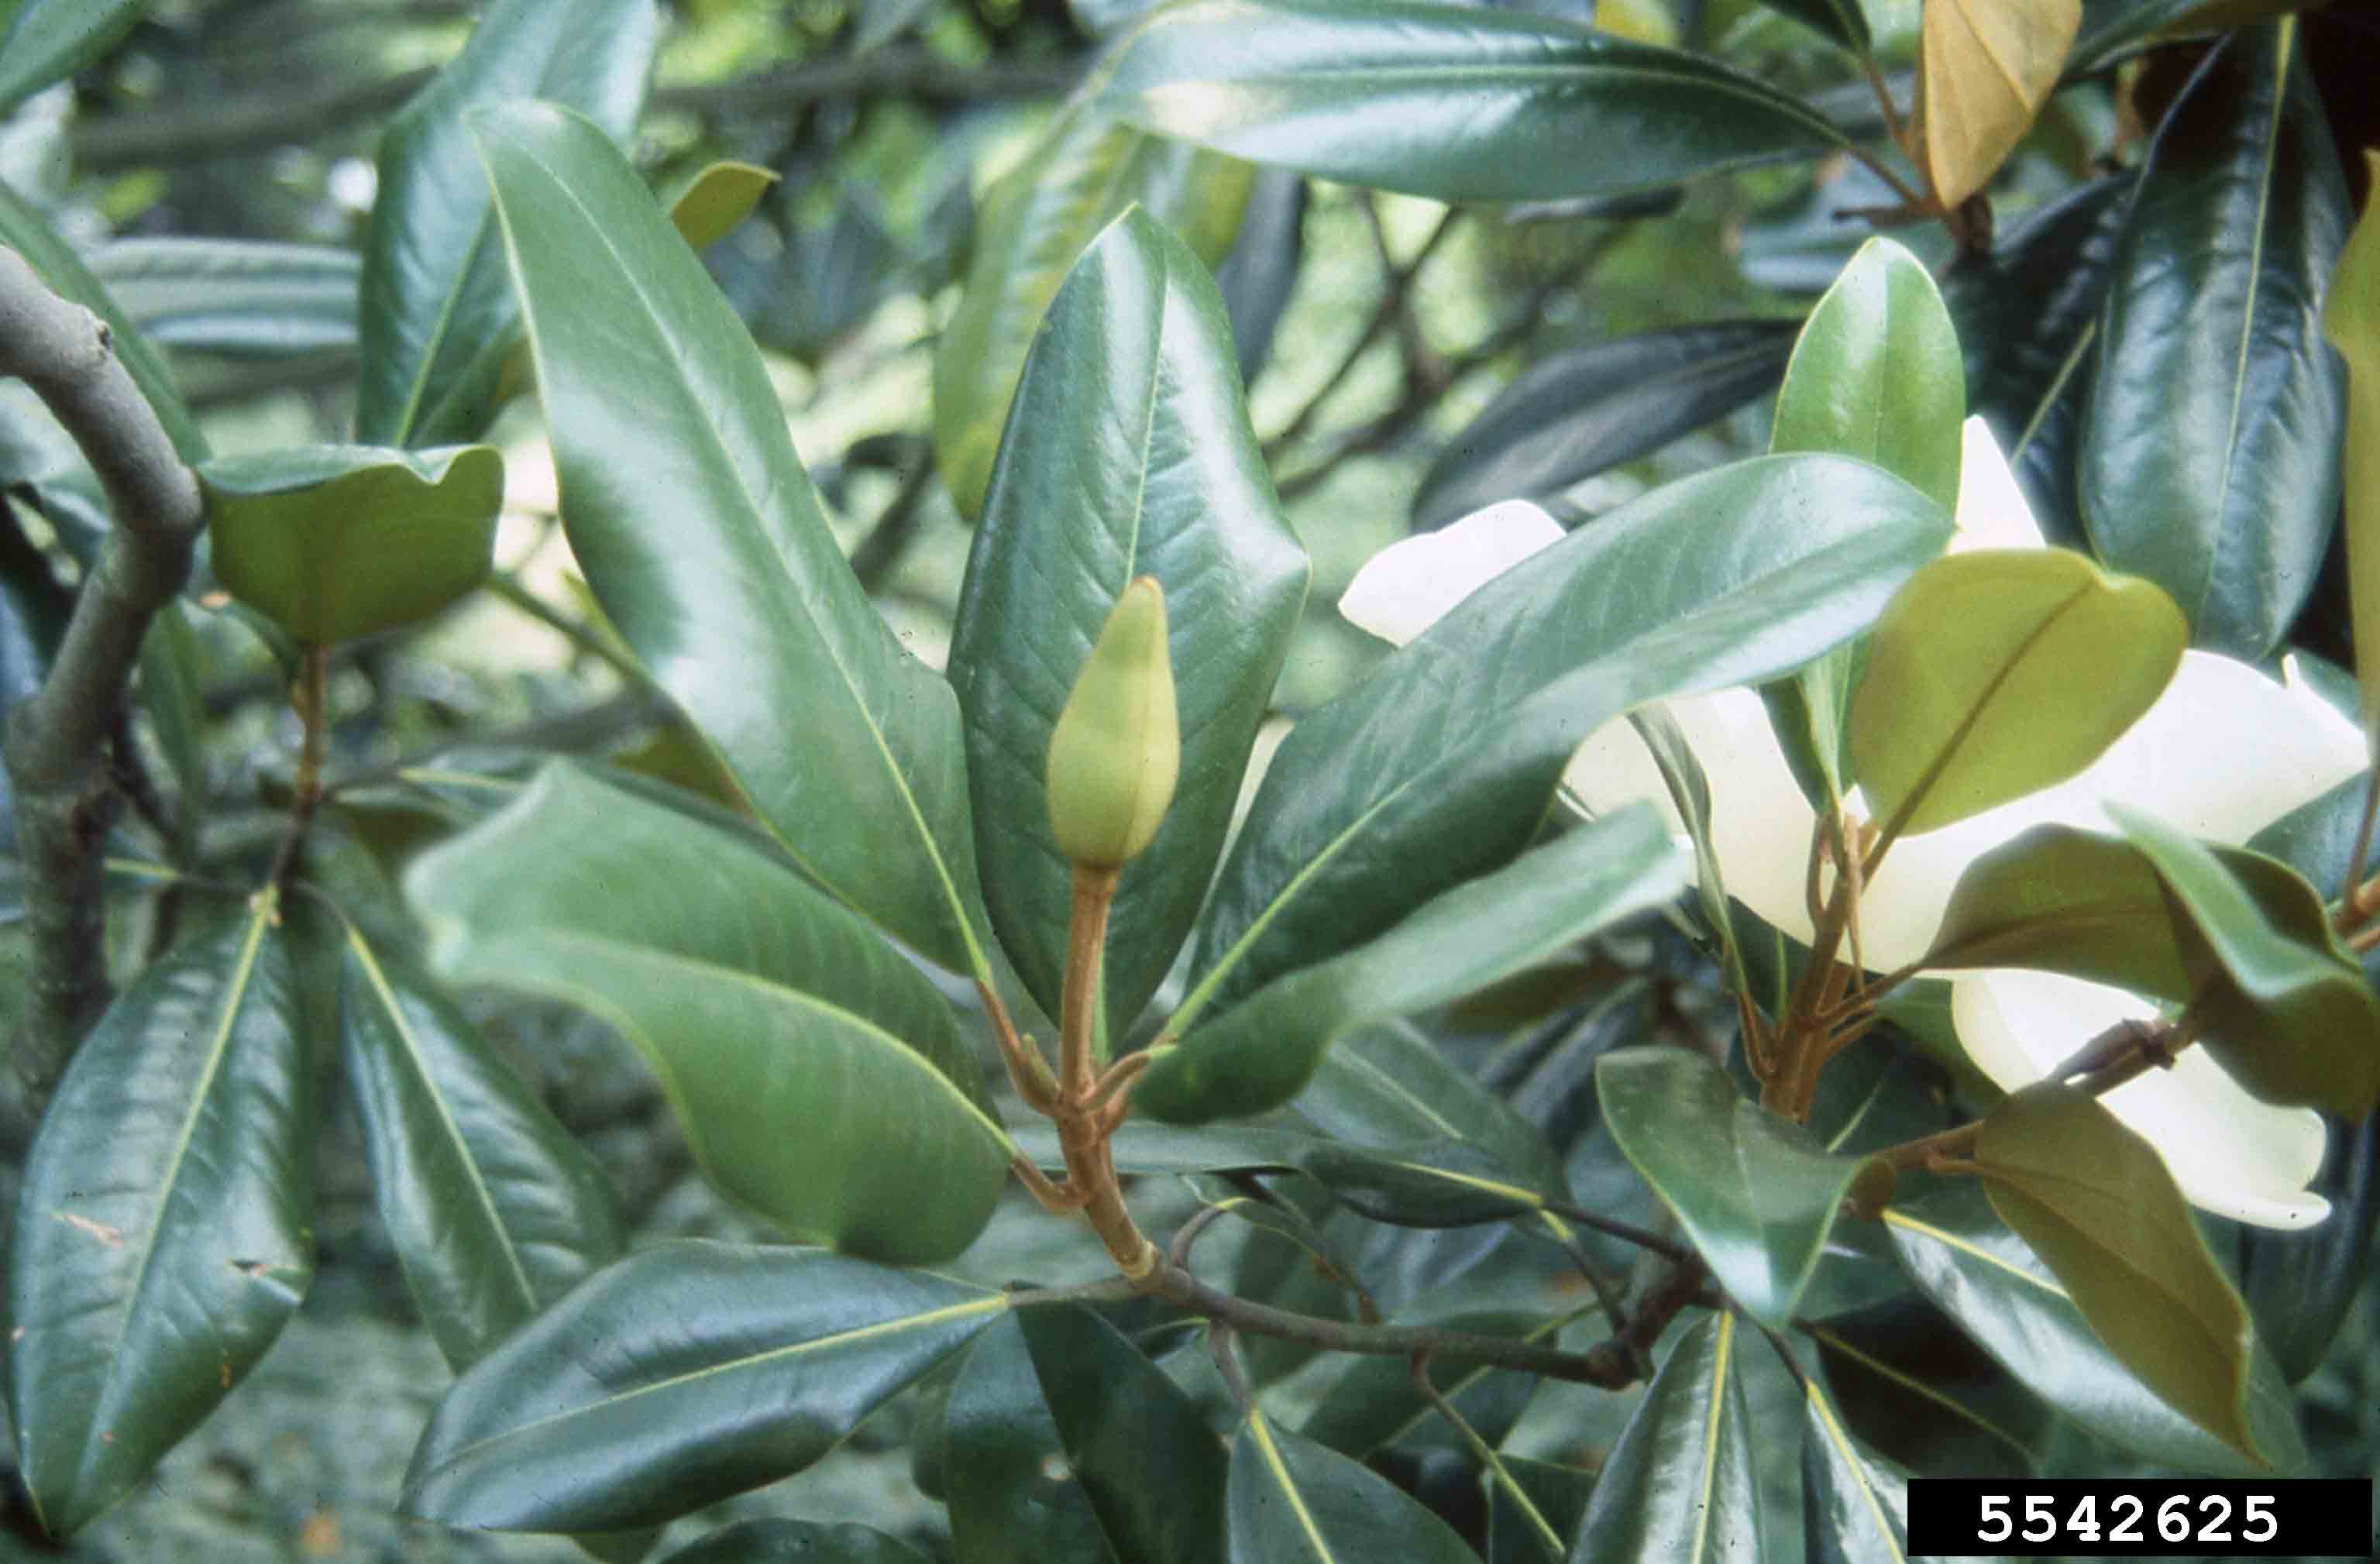 Southern magnolia leaves with flower bud